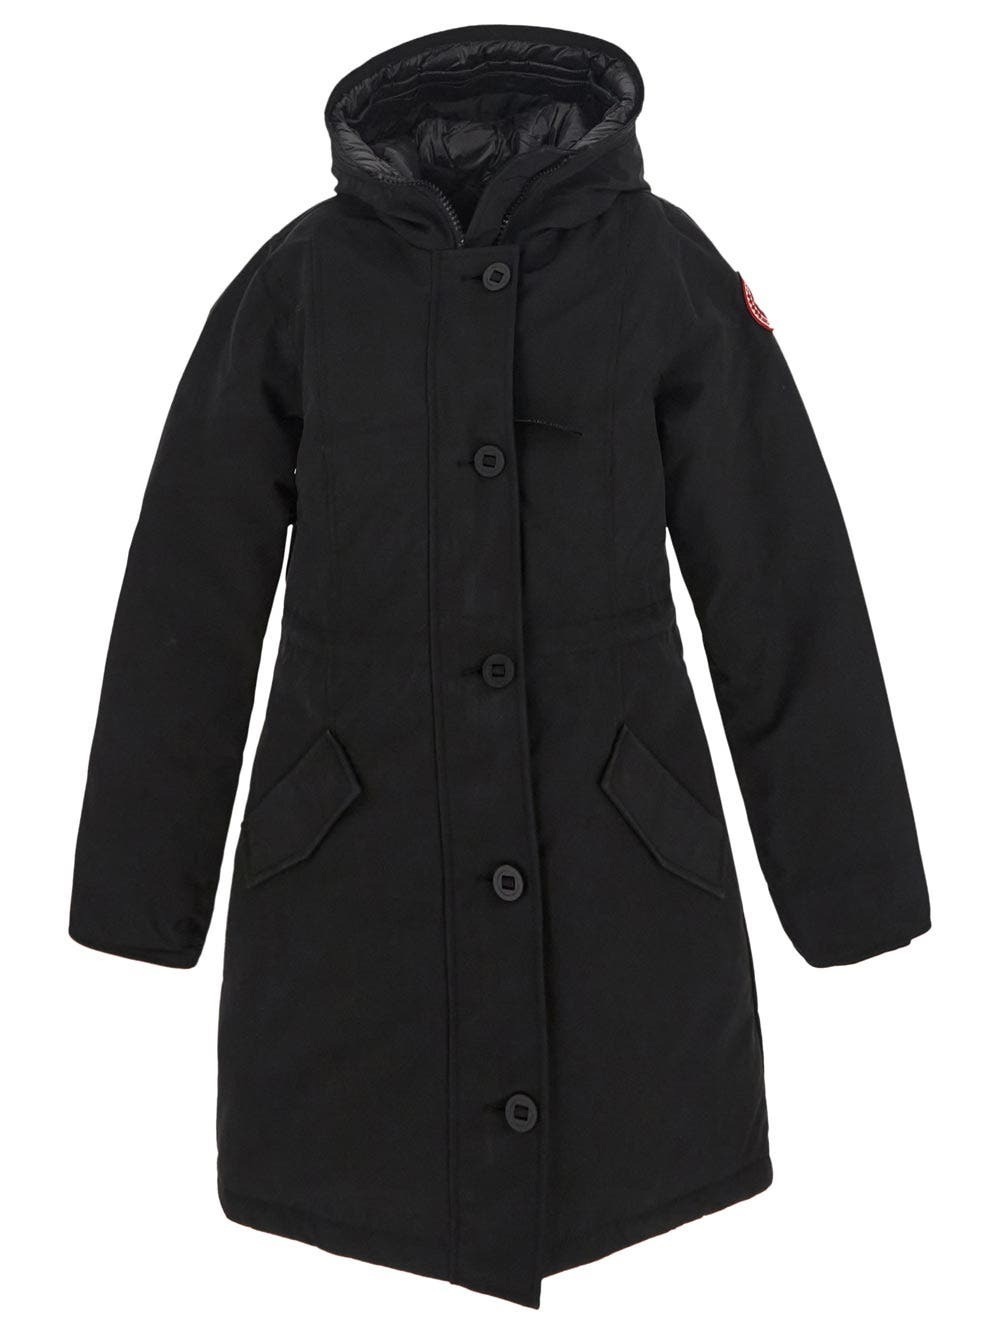 Blakely Parka – Canada Goose Generations